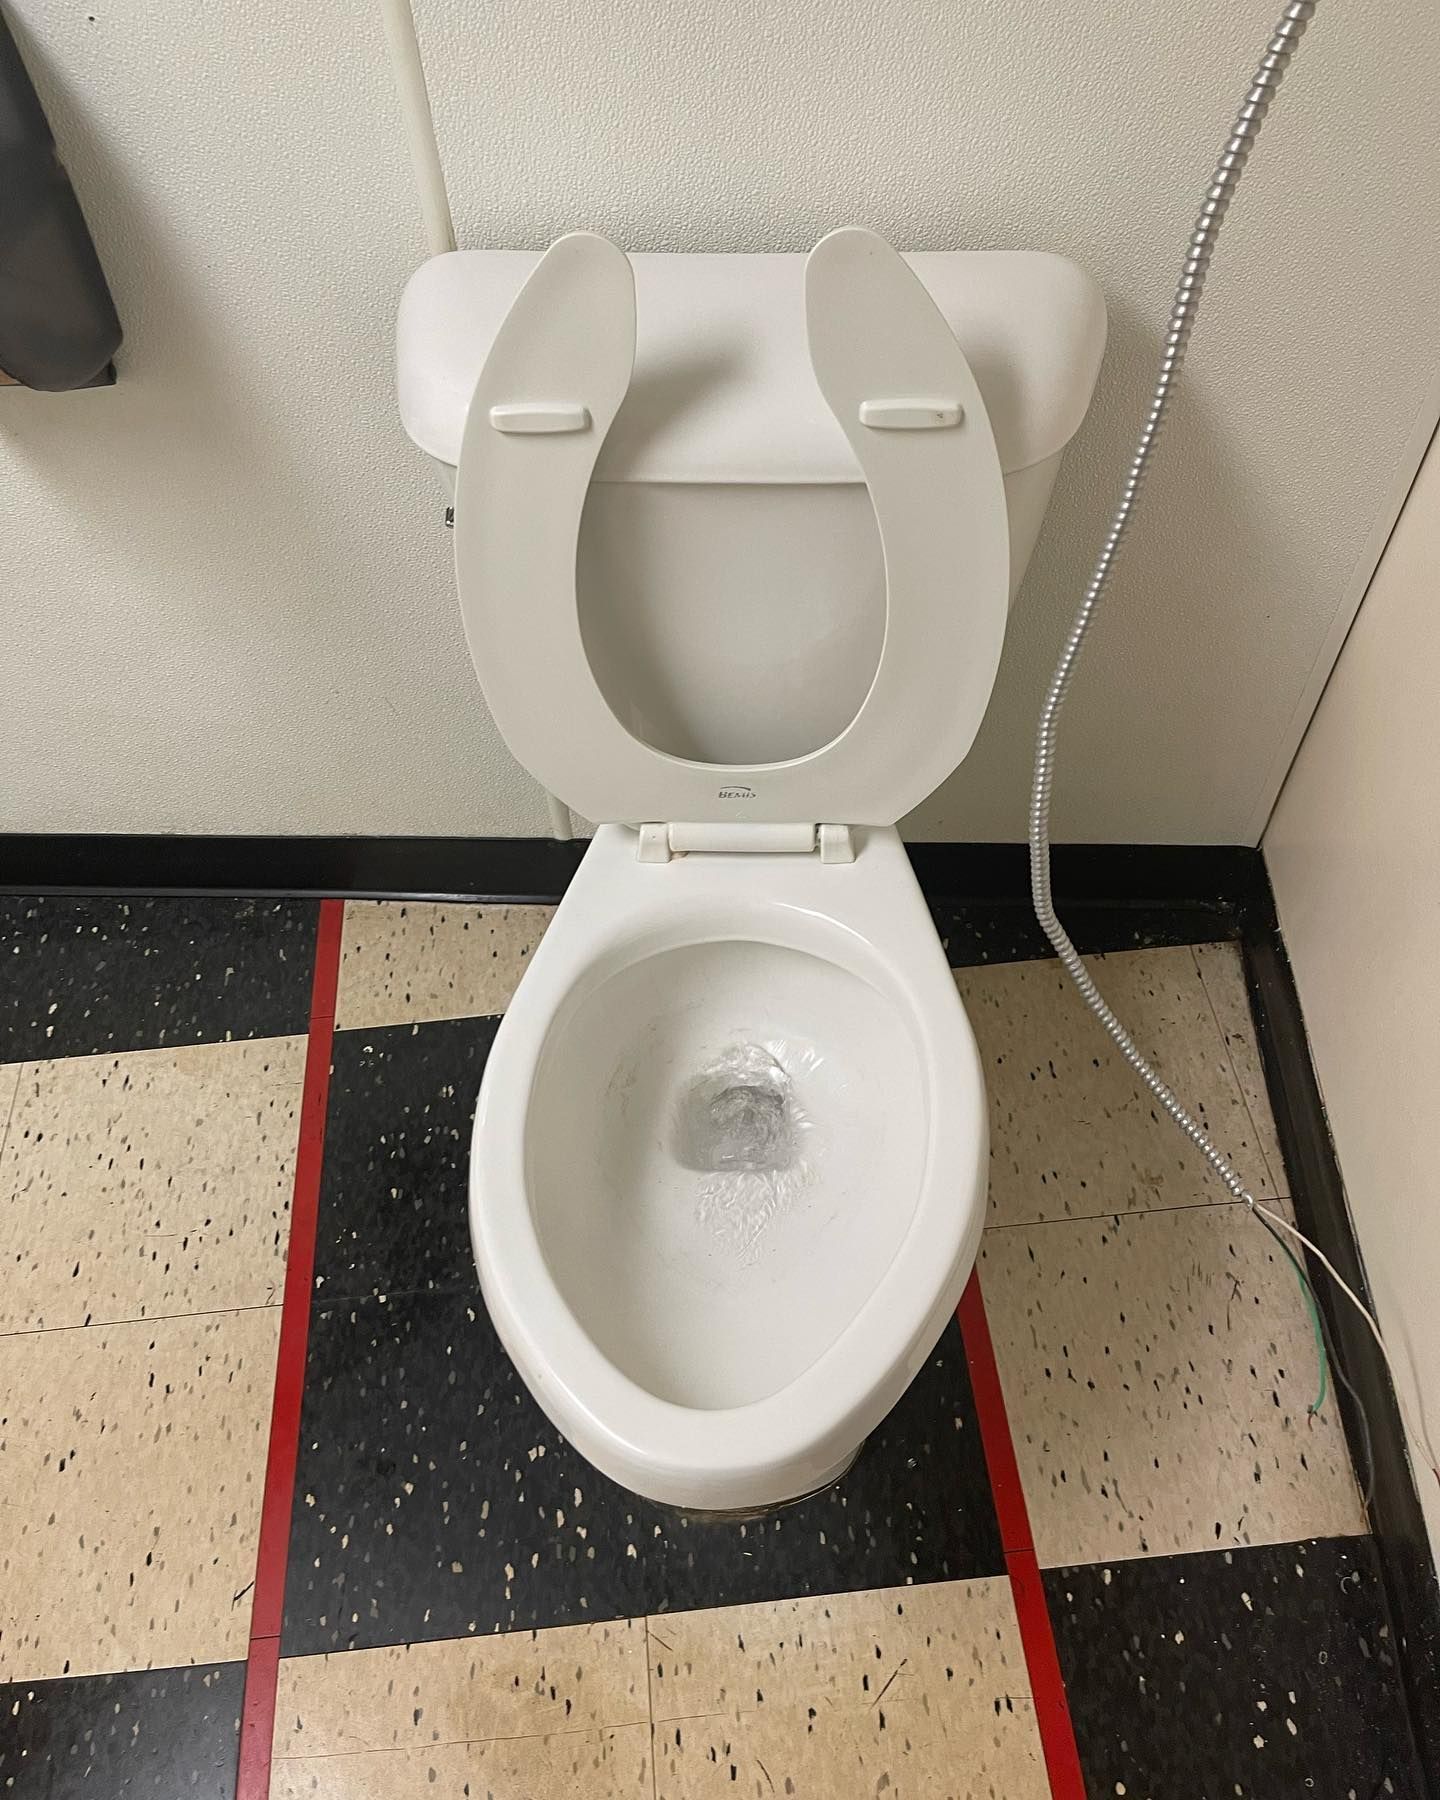 After is an image of a clean and pristine toilet